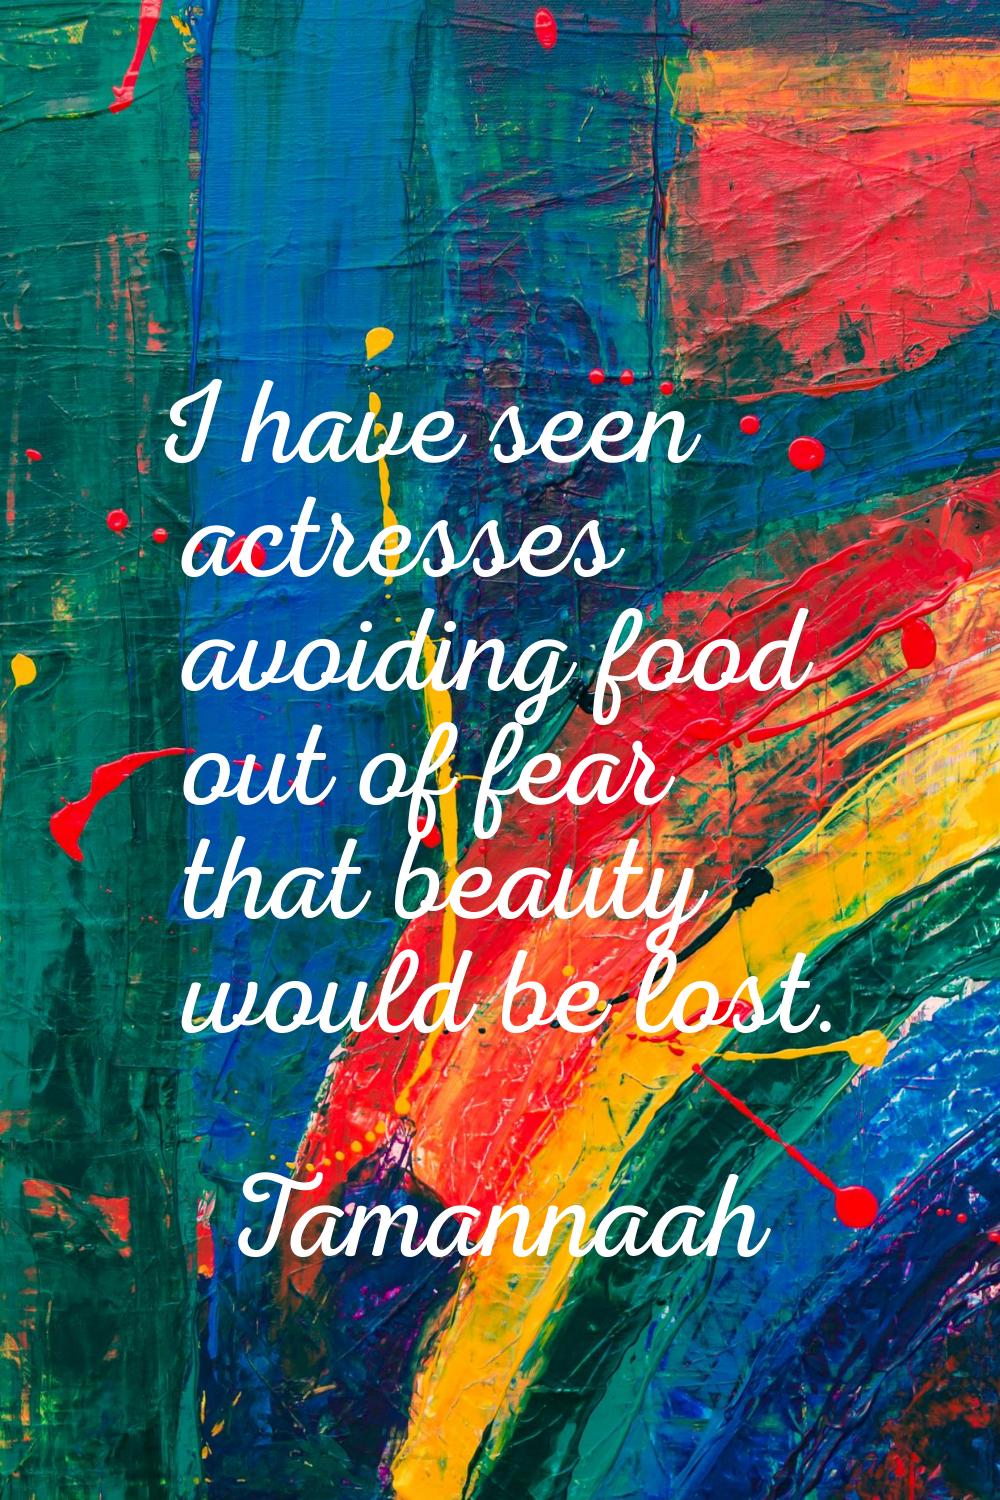 I have seen actresses avoiding food out of fear that beauty would be lost.